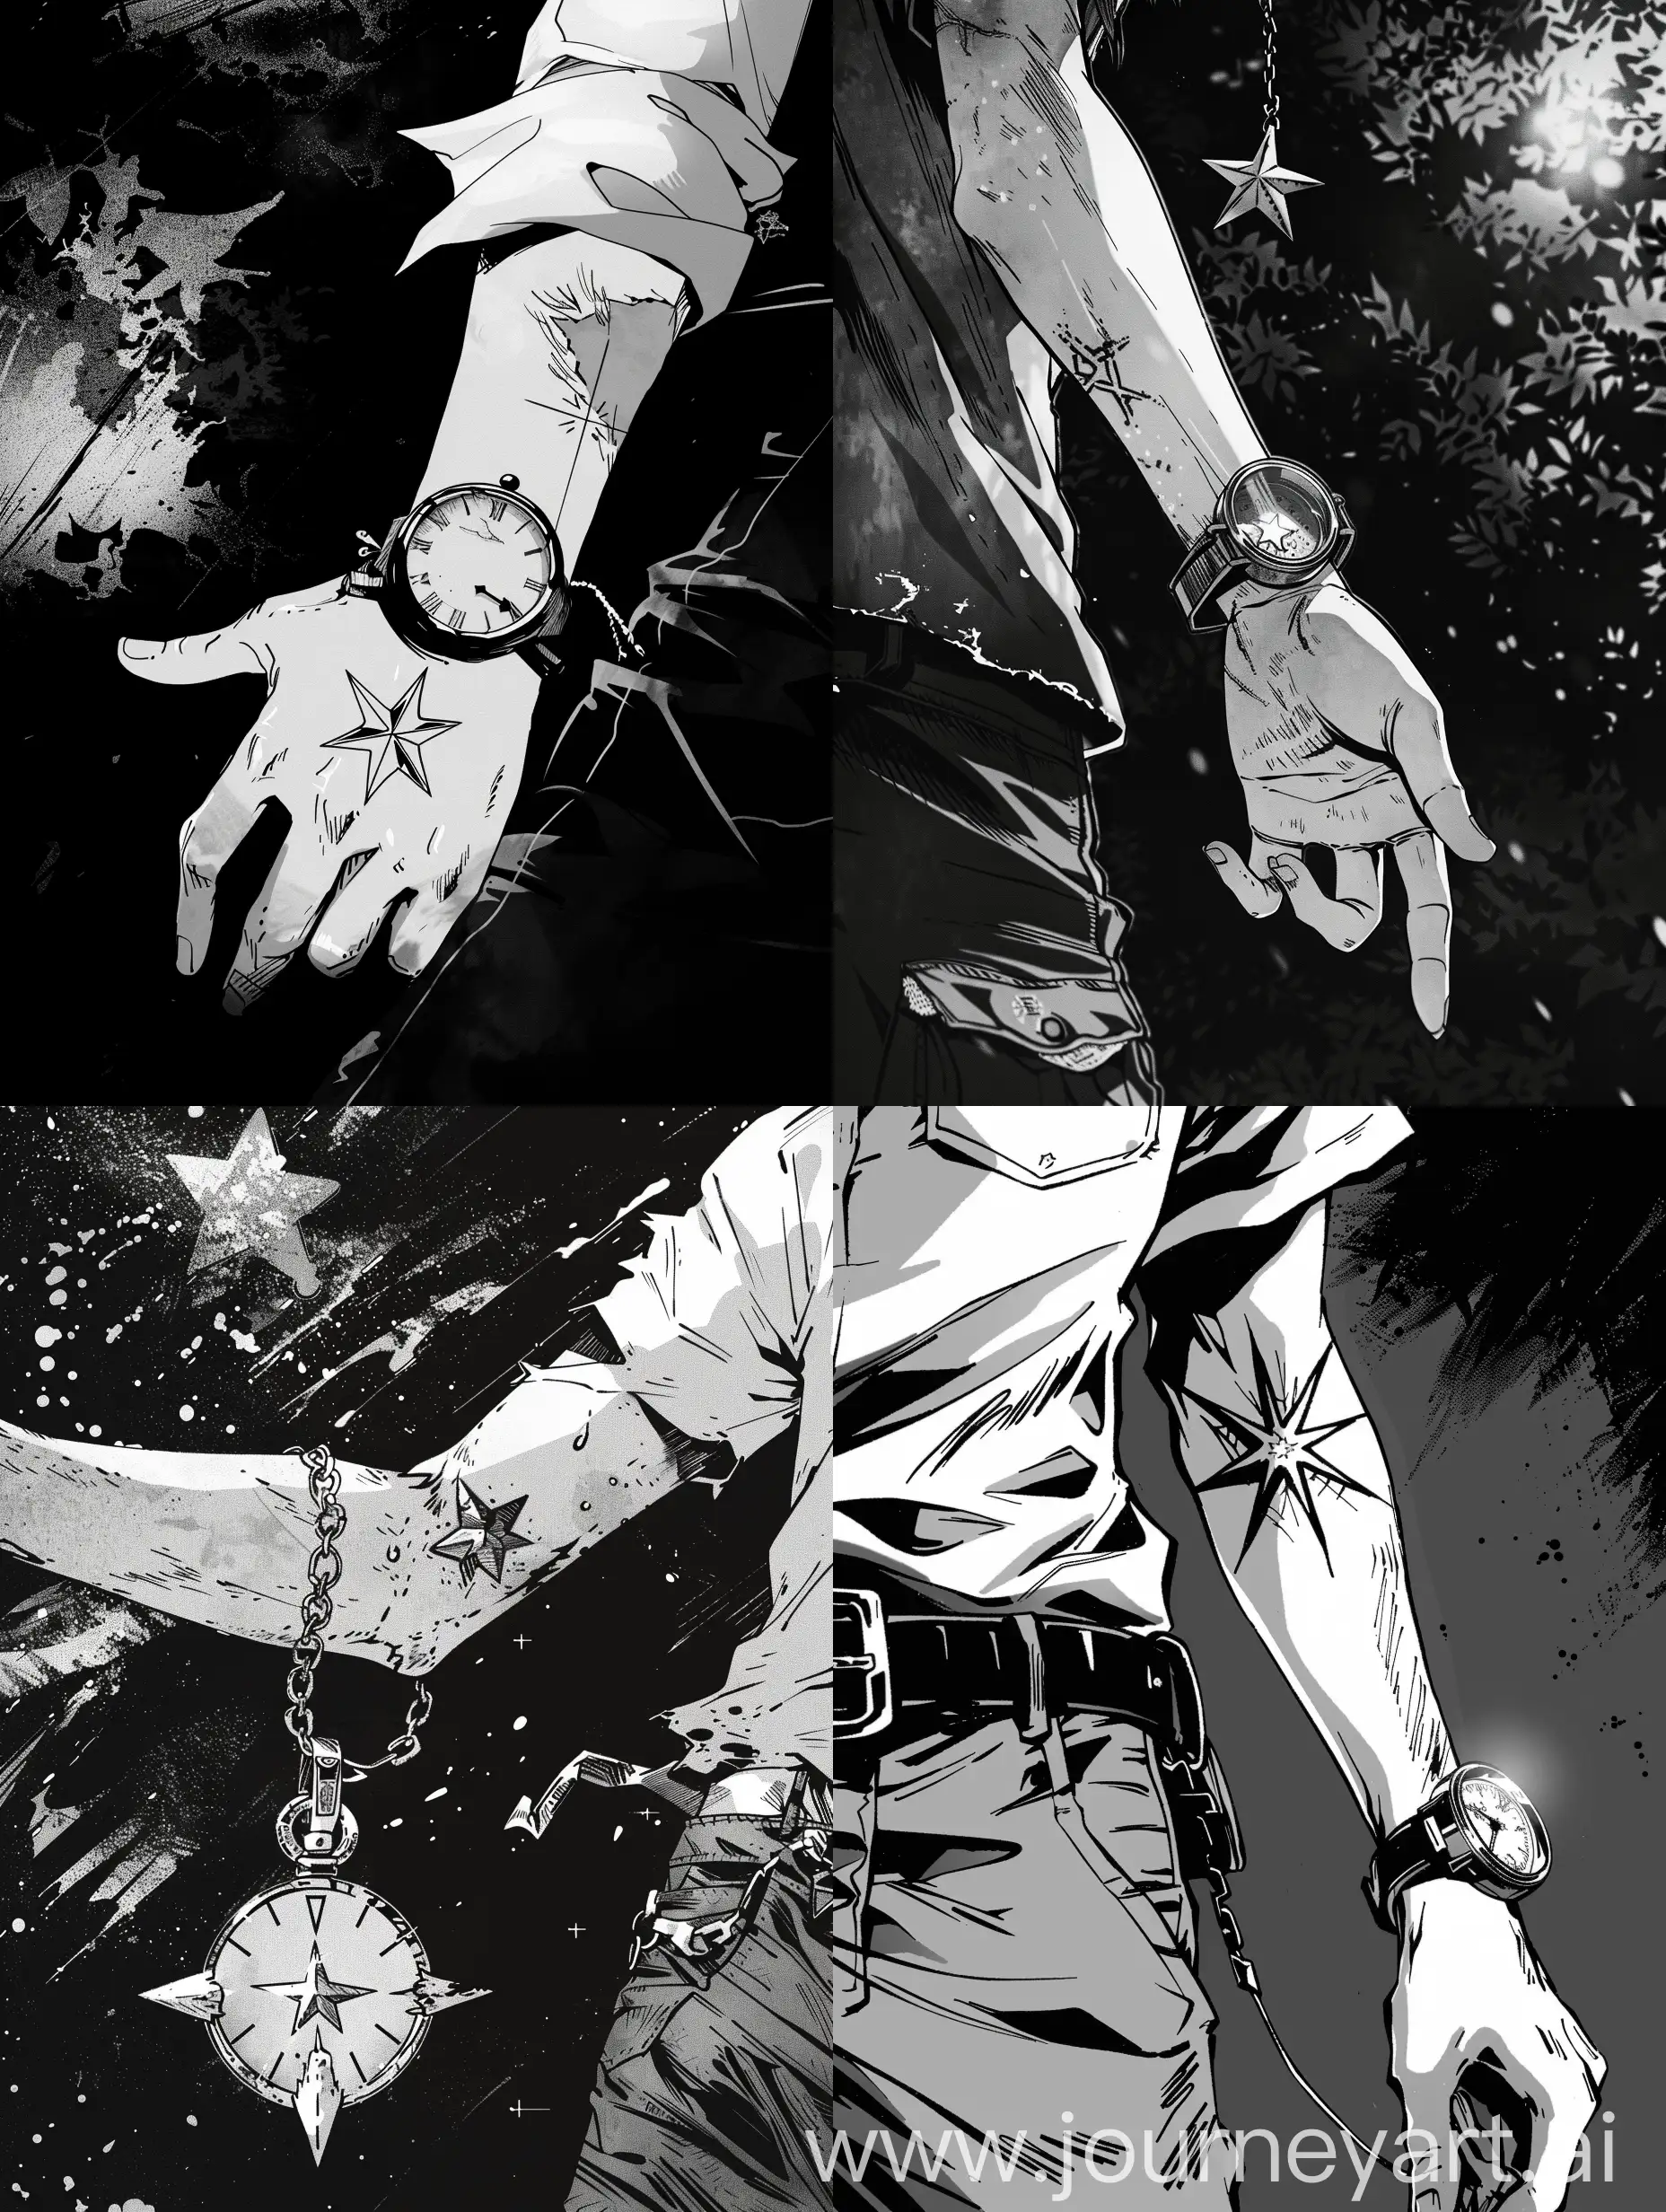 The time amulet in the guy's hand, there's a star-shaped scar on his arm, manga style.